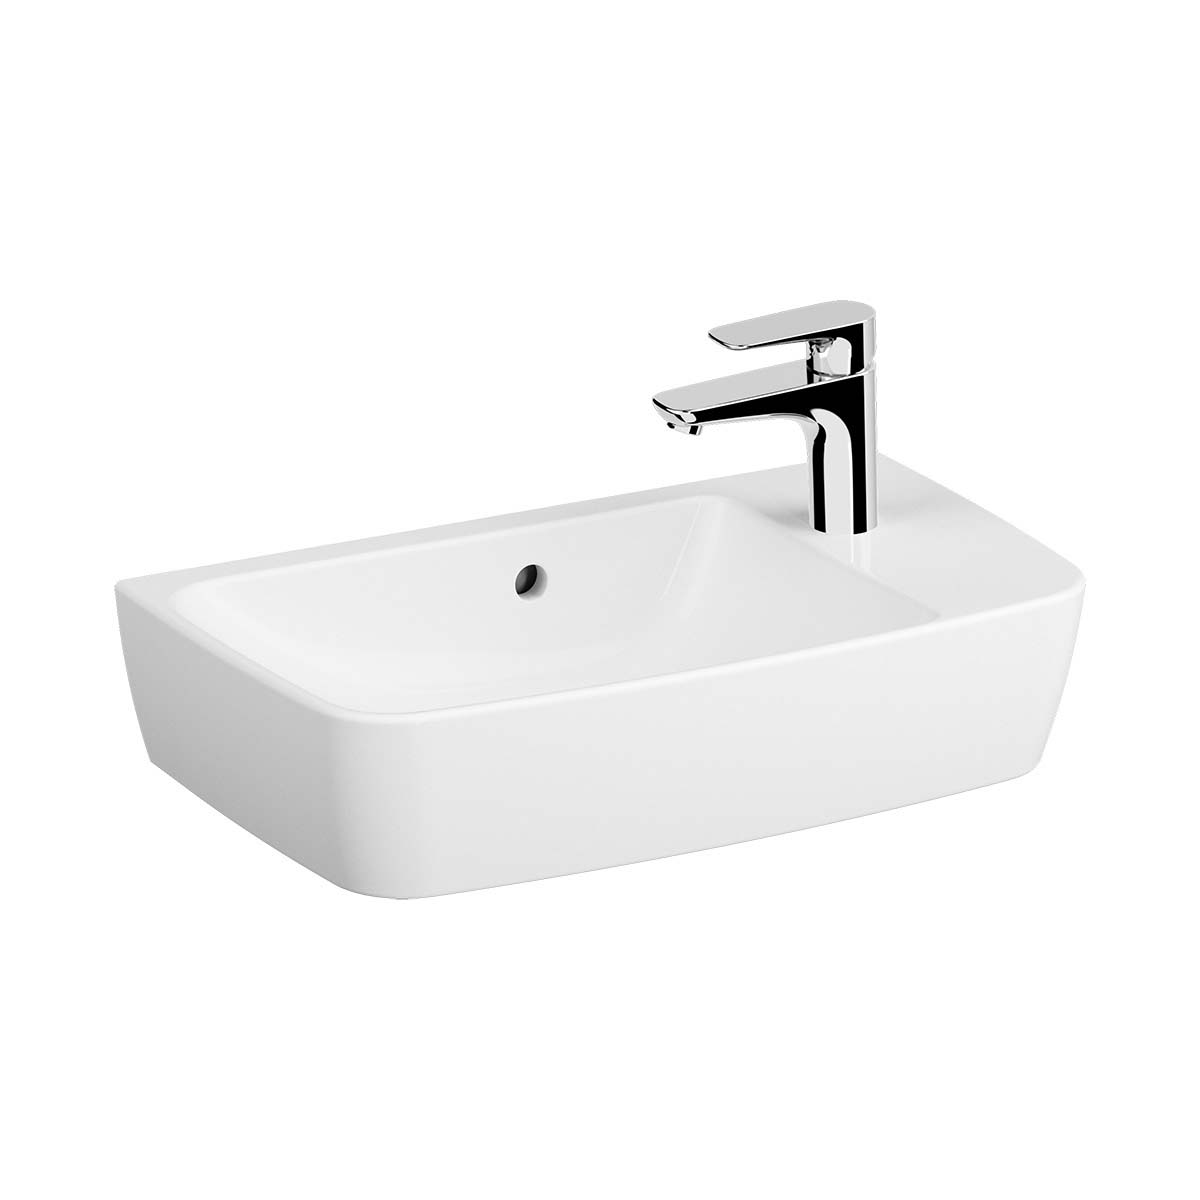 Compact Basin, 60X35 cm, One Tap Hole On Right, With Overflow Hole, For Countertop Use